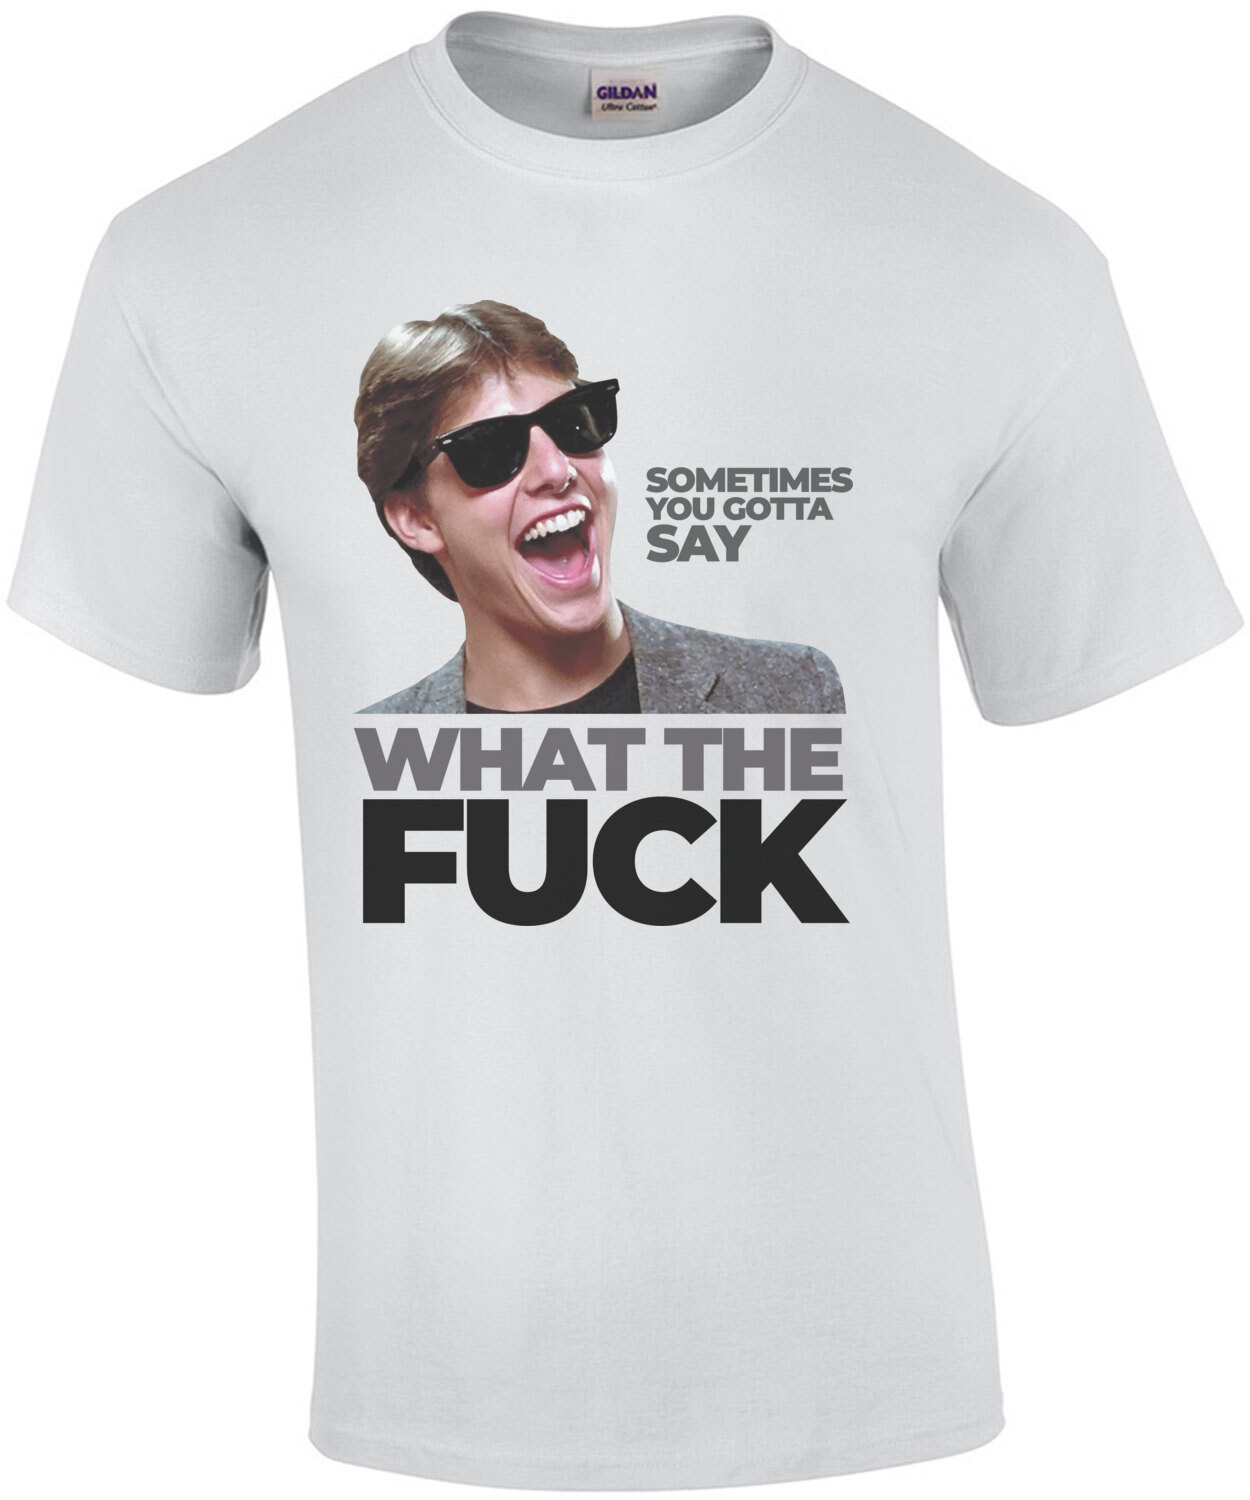 Sometimes you gotta say - What the fuck - Tom Cruise - Risky Business T-Shirt 80's T-Shirt